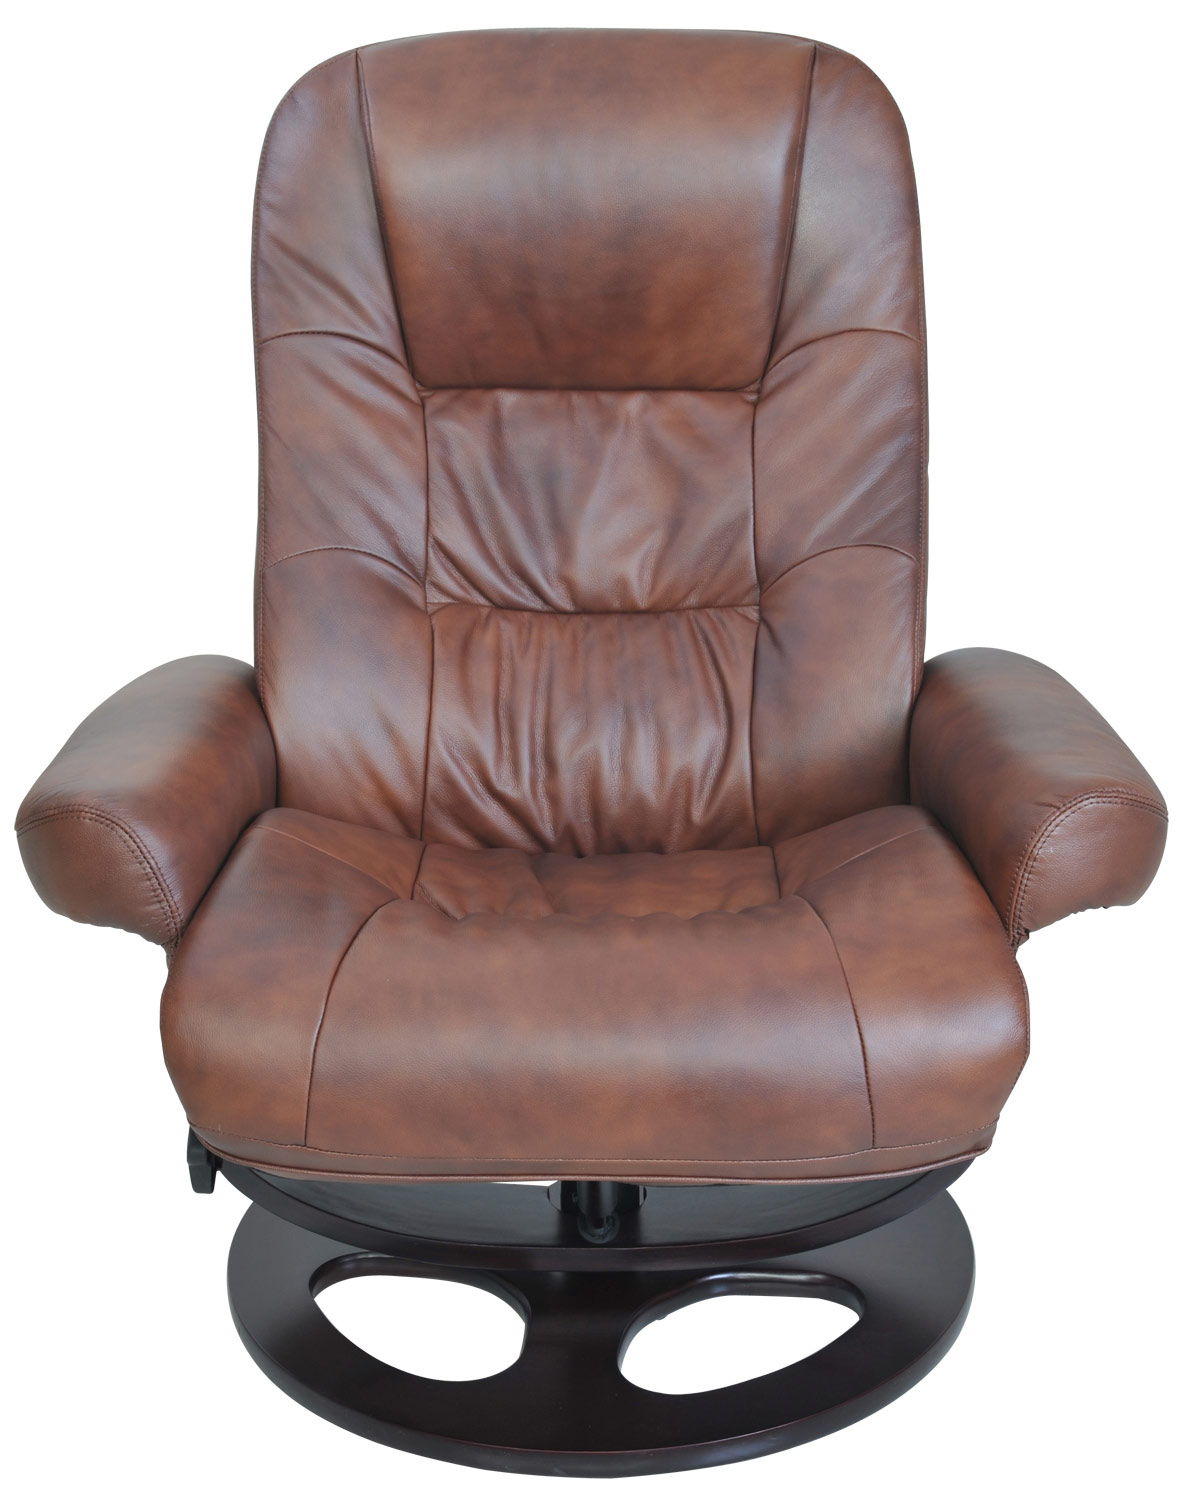 Barcalounger Jacque Pedestal Recliner Chair and Ottoman - Hilton Whiskey/Leather Match